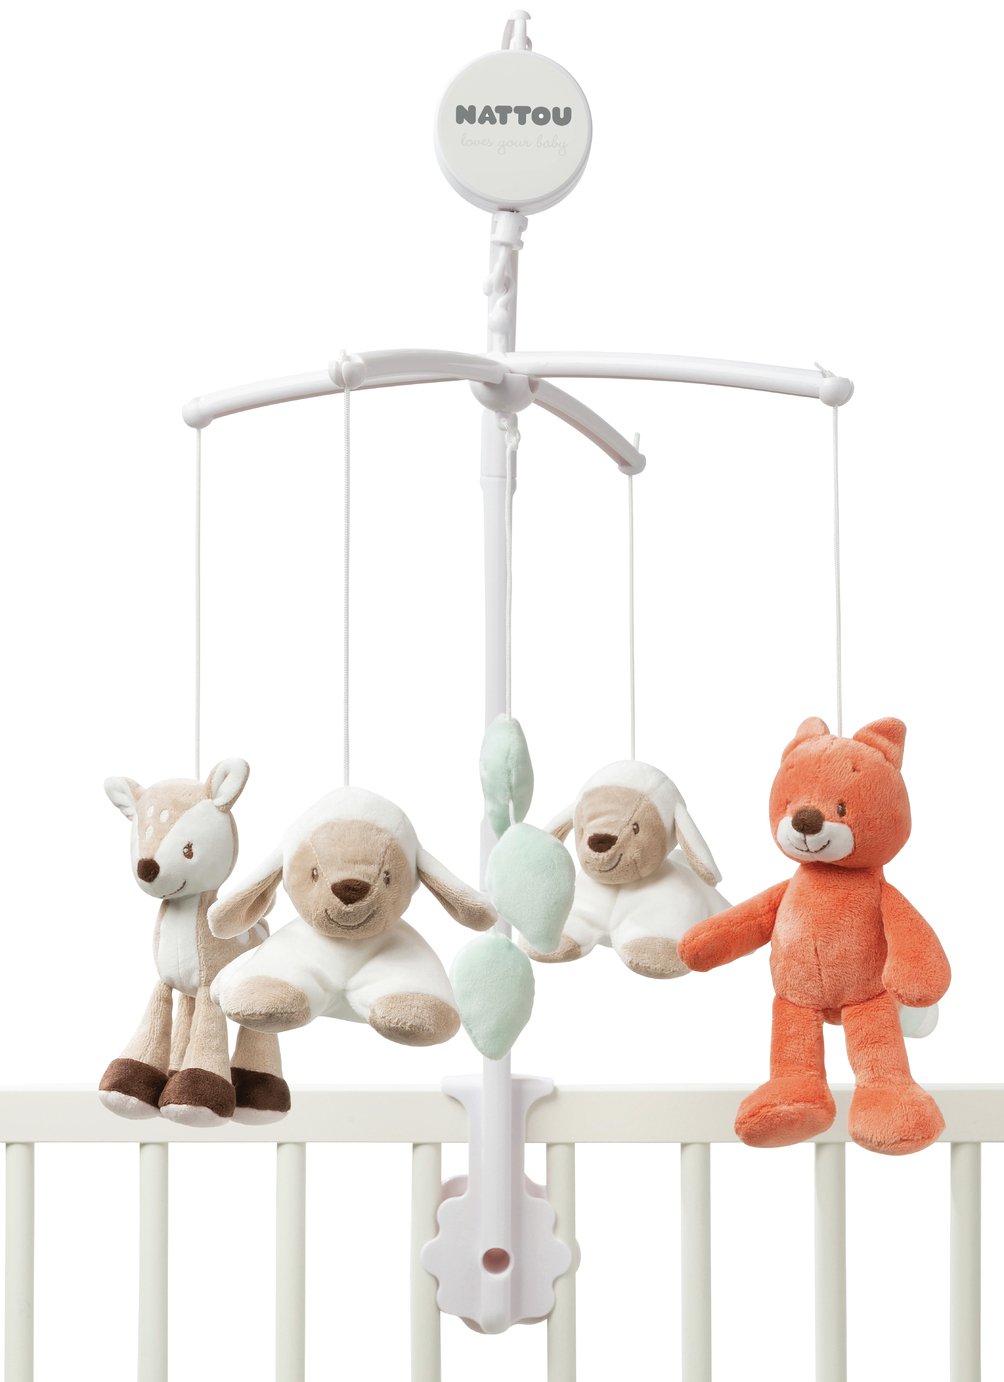 Nattou Fanny the Deer and Oscar the Fox Mobile Review